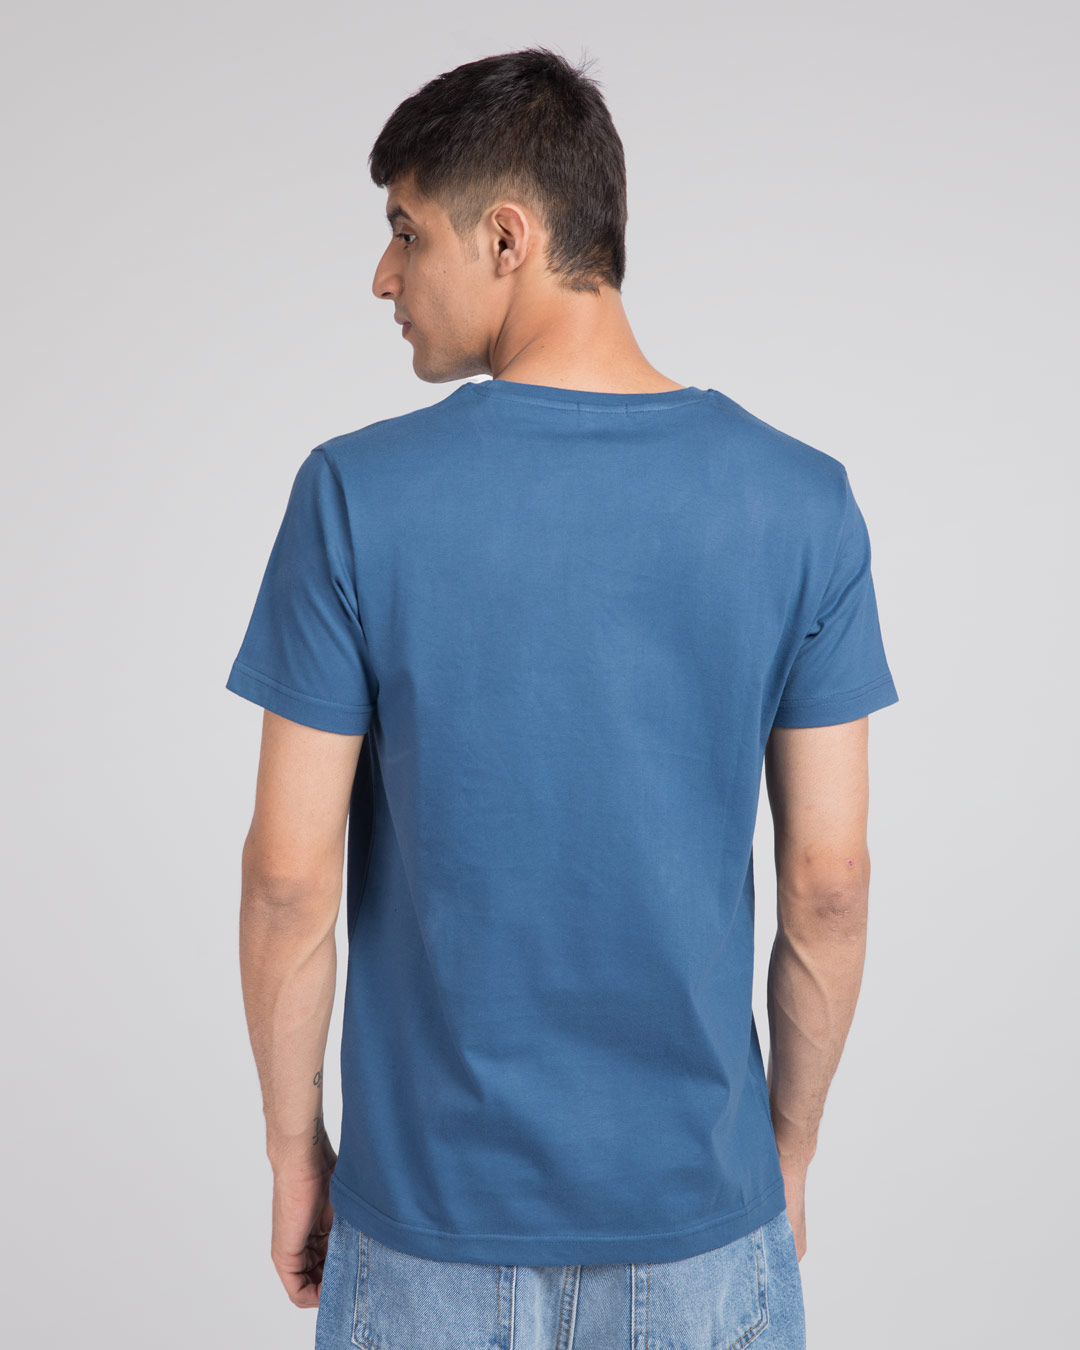 Shop Busy Doin Nothing Half Sleeve T-Shirt (DL)-Prussian Blue New-Back